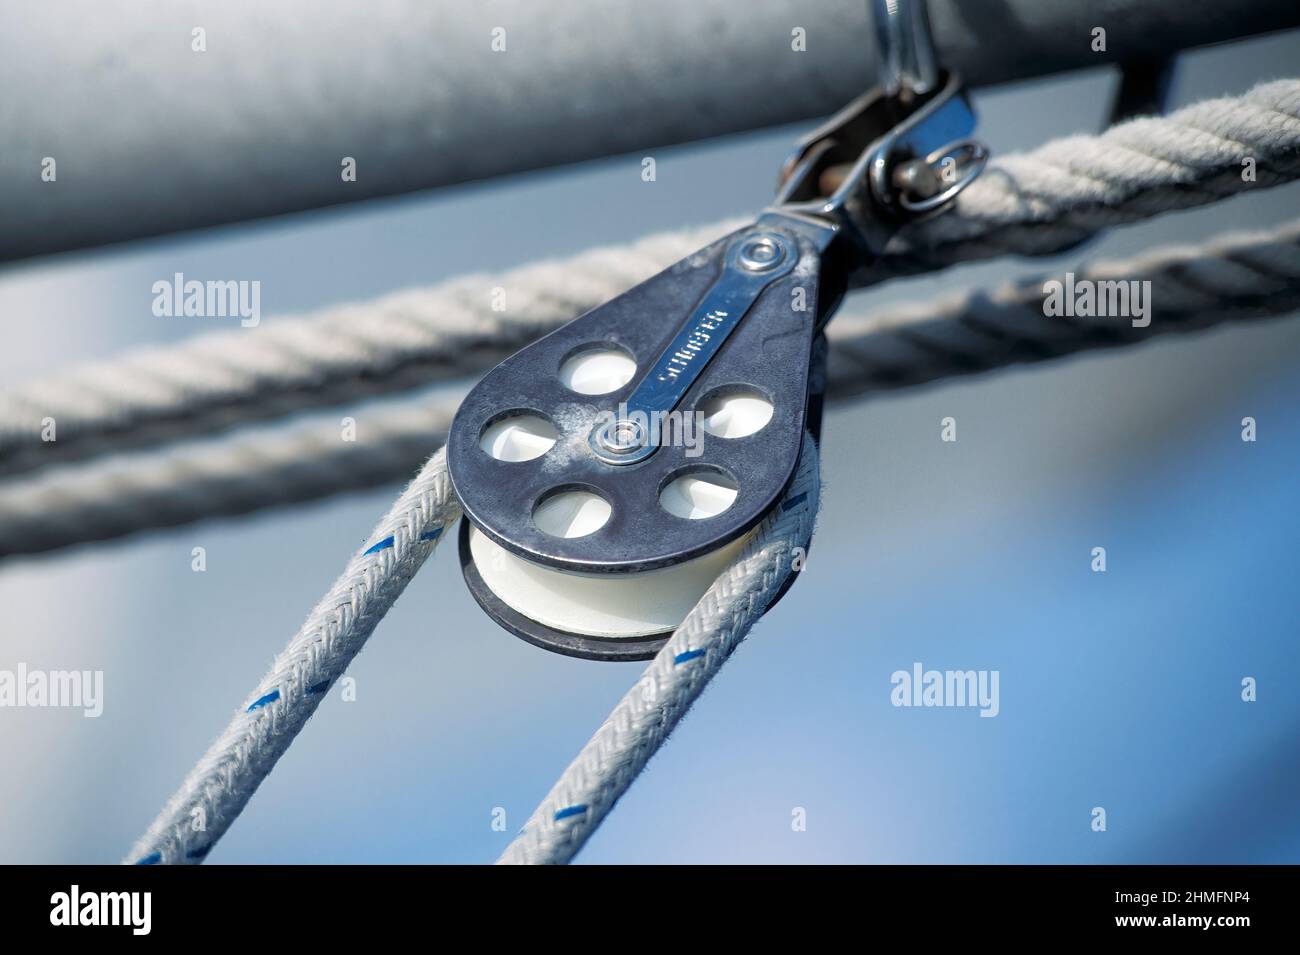 Close-up of a pulley used on a sailboat. Stock Photo